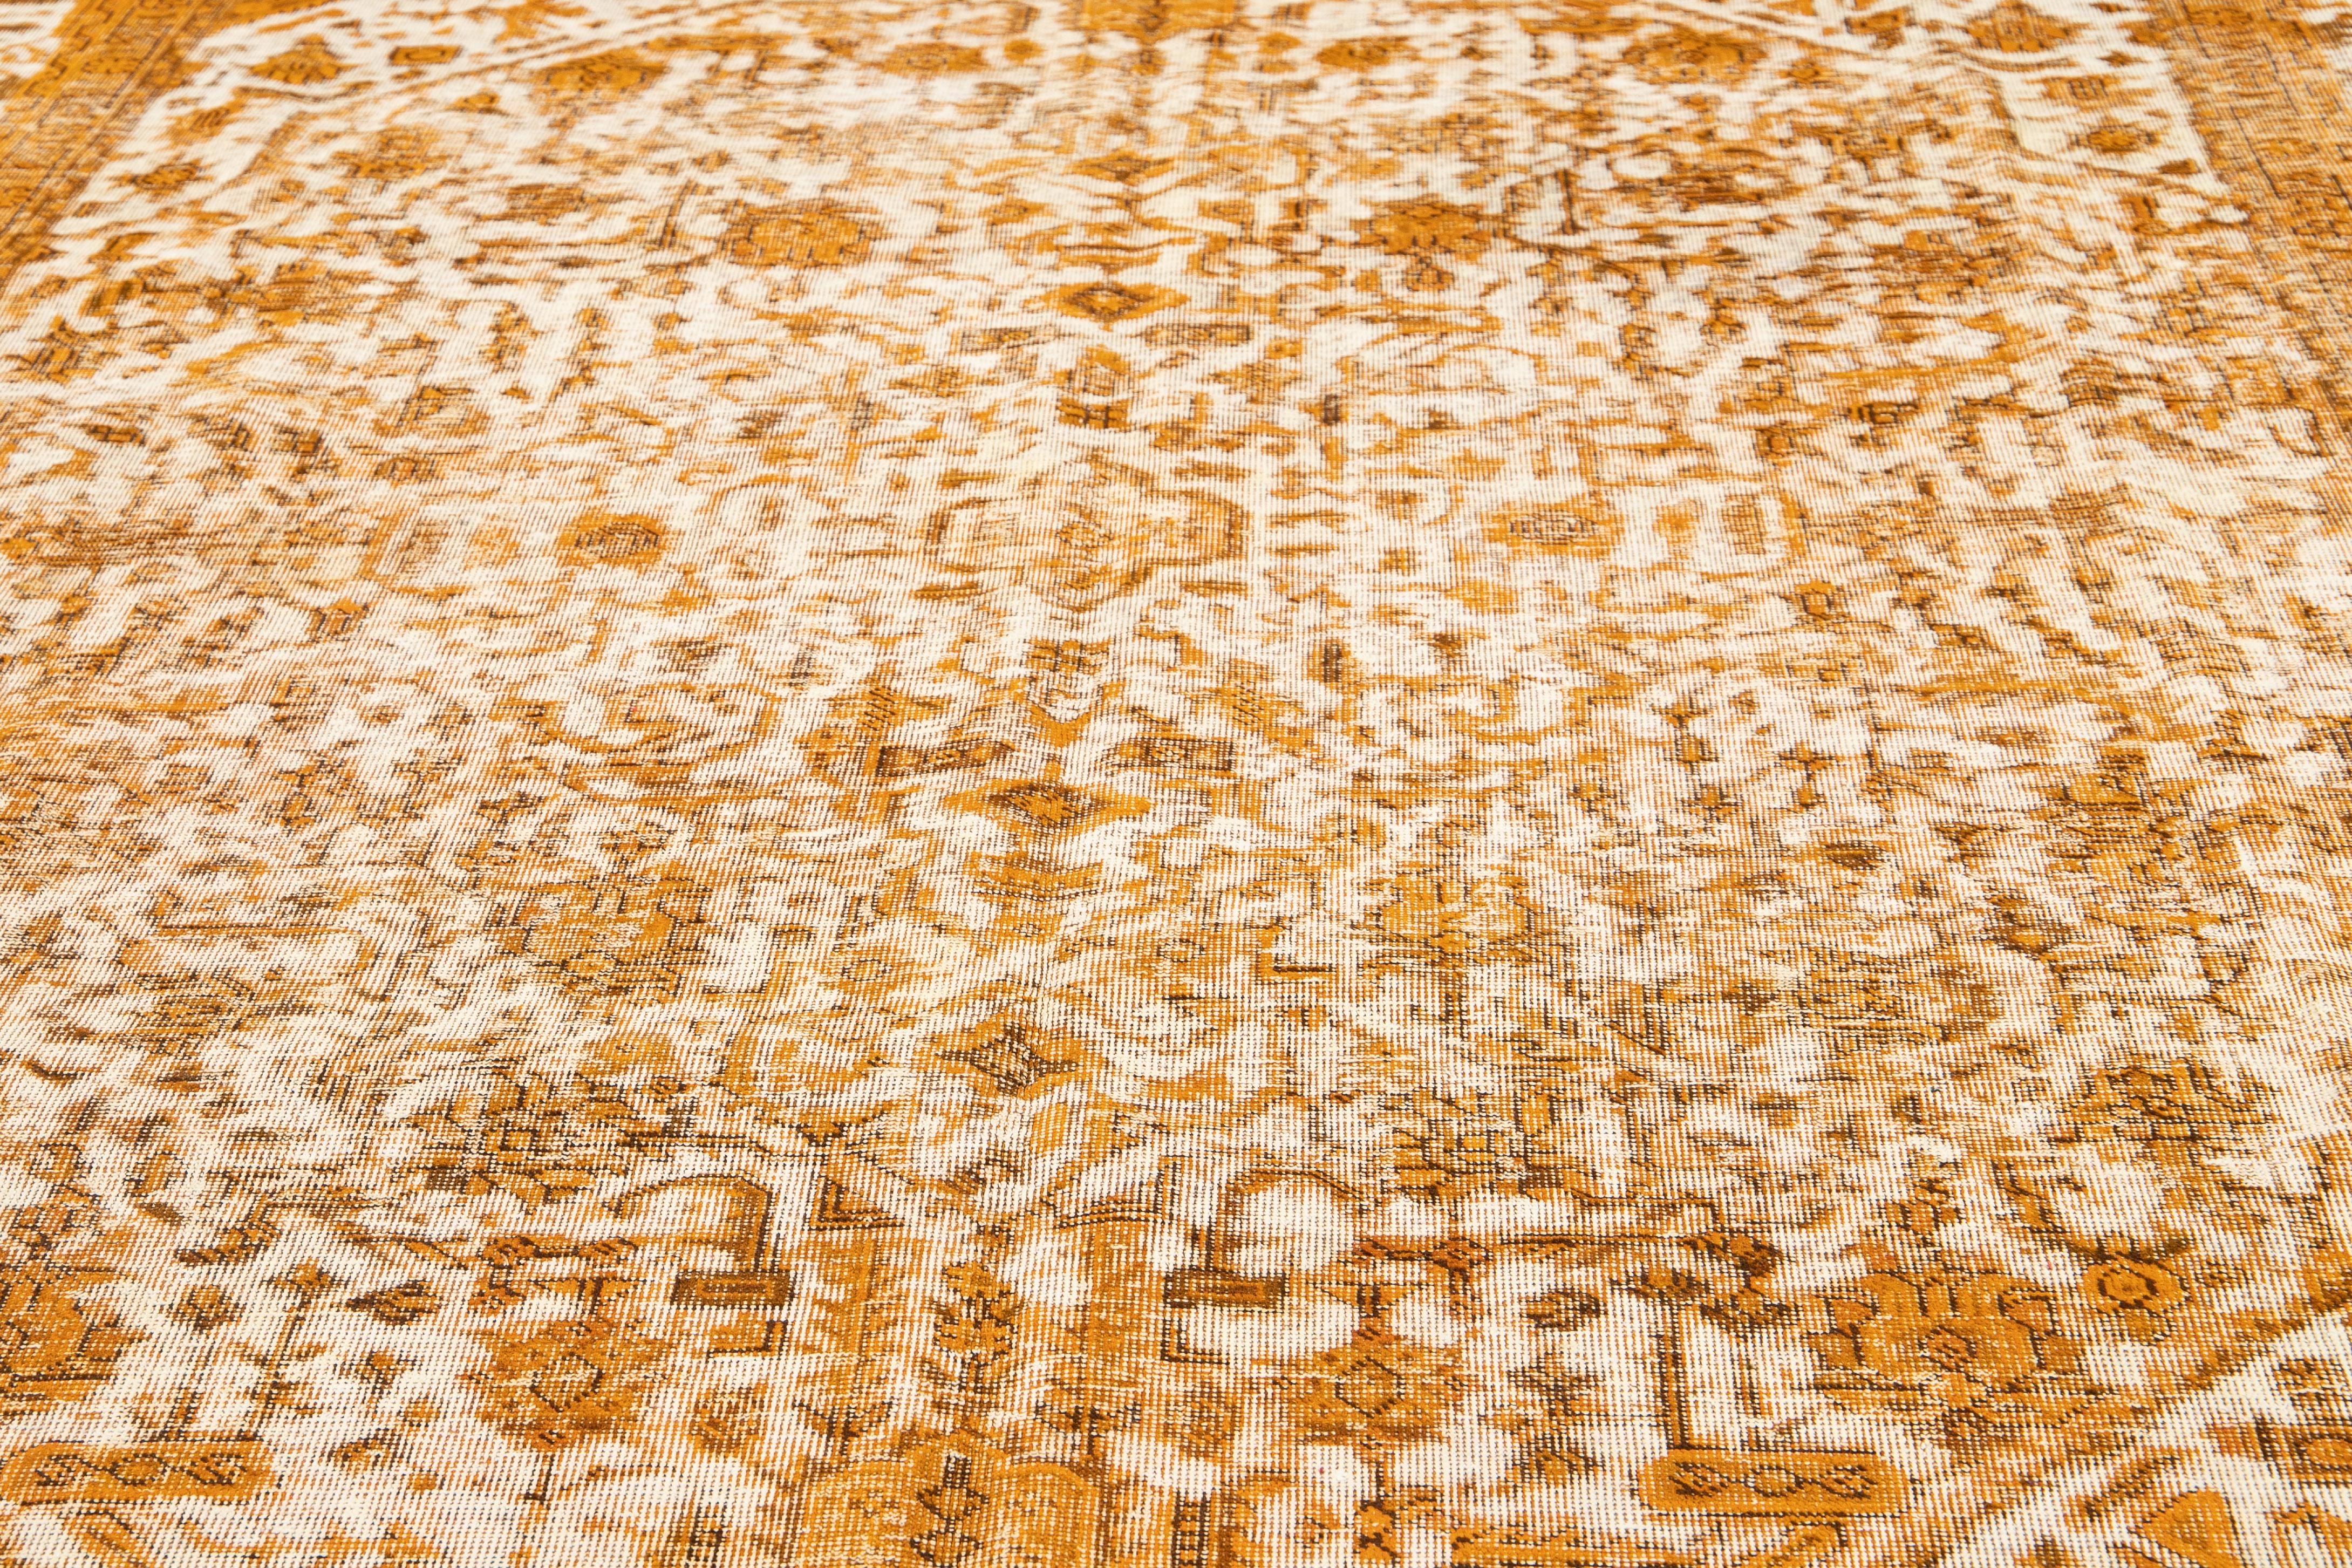 This beautiful rug with a floral design has a beige Wool field. This piece has been carefully distressed and dyed to give it a charming rustic appeal. It showcases a subdued color palette of orange and brown.

This rug measures 10' x 12'8